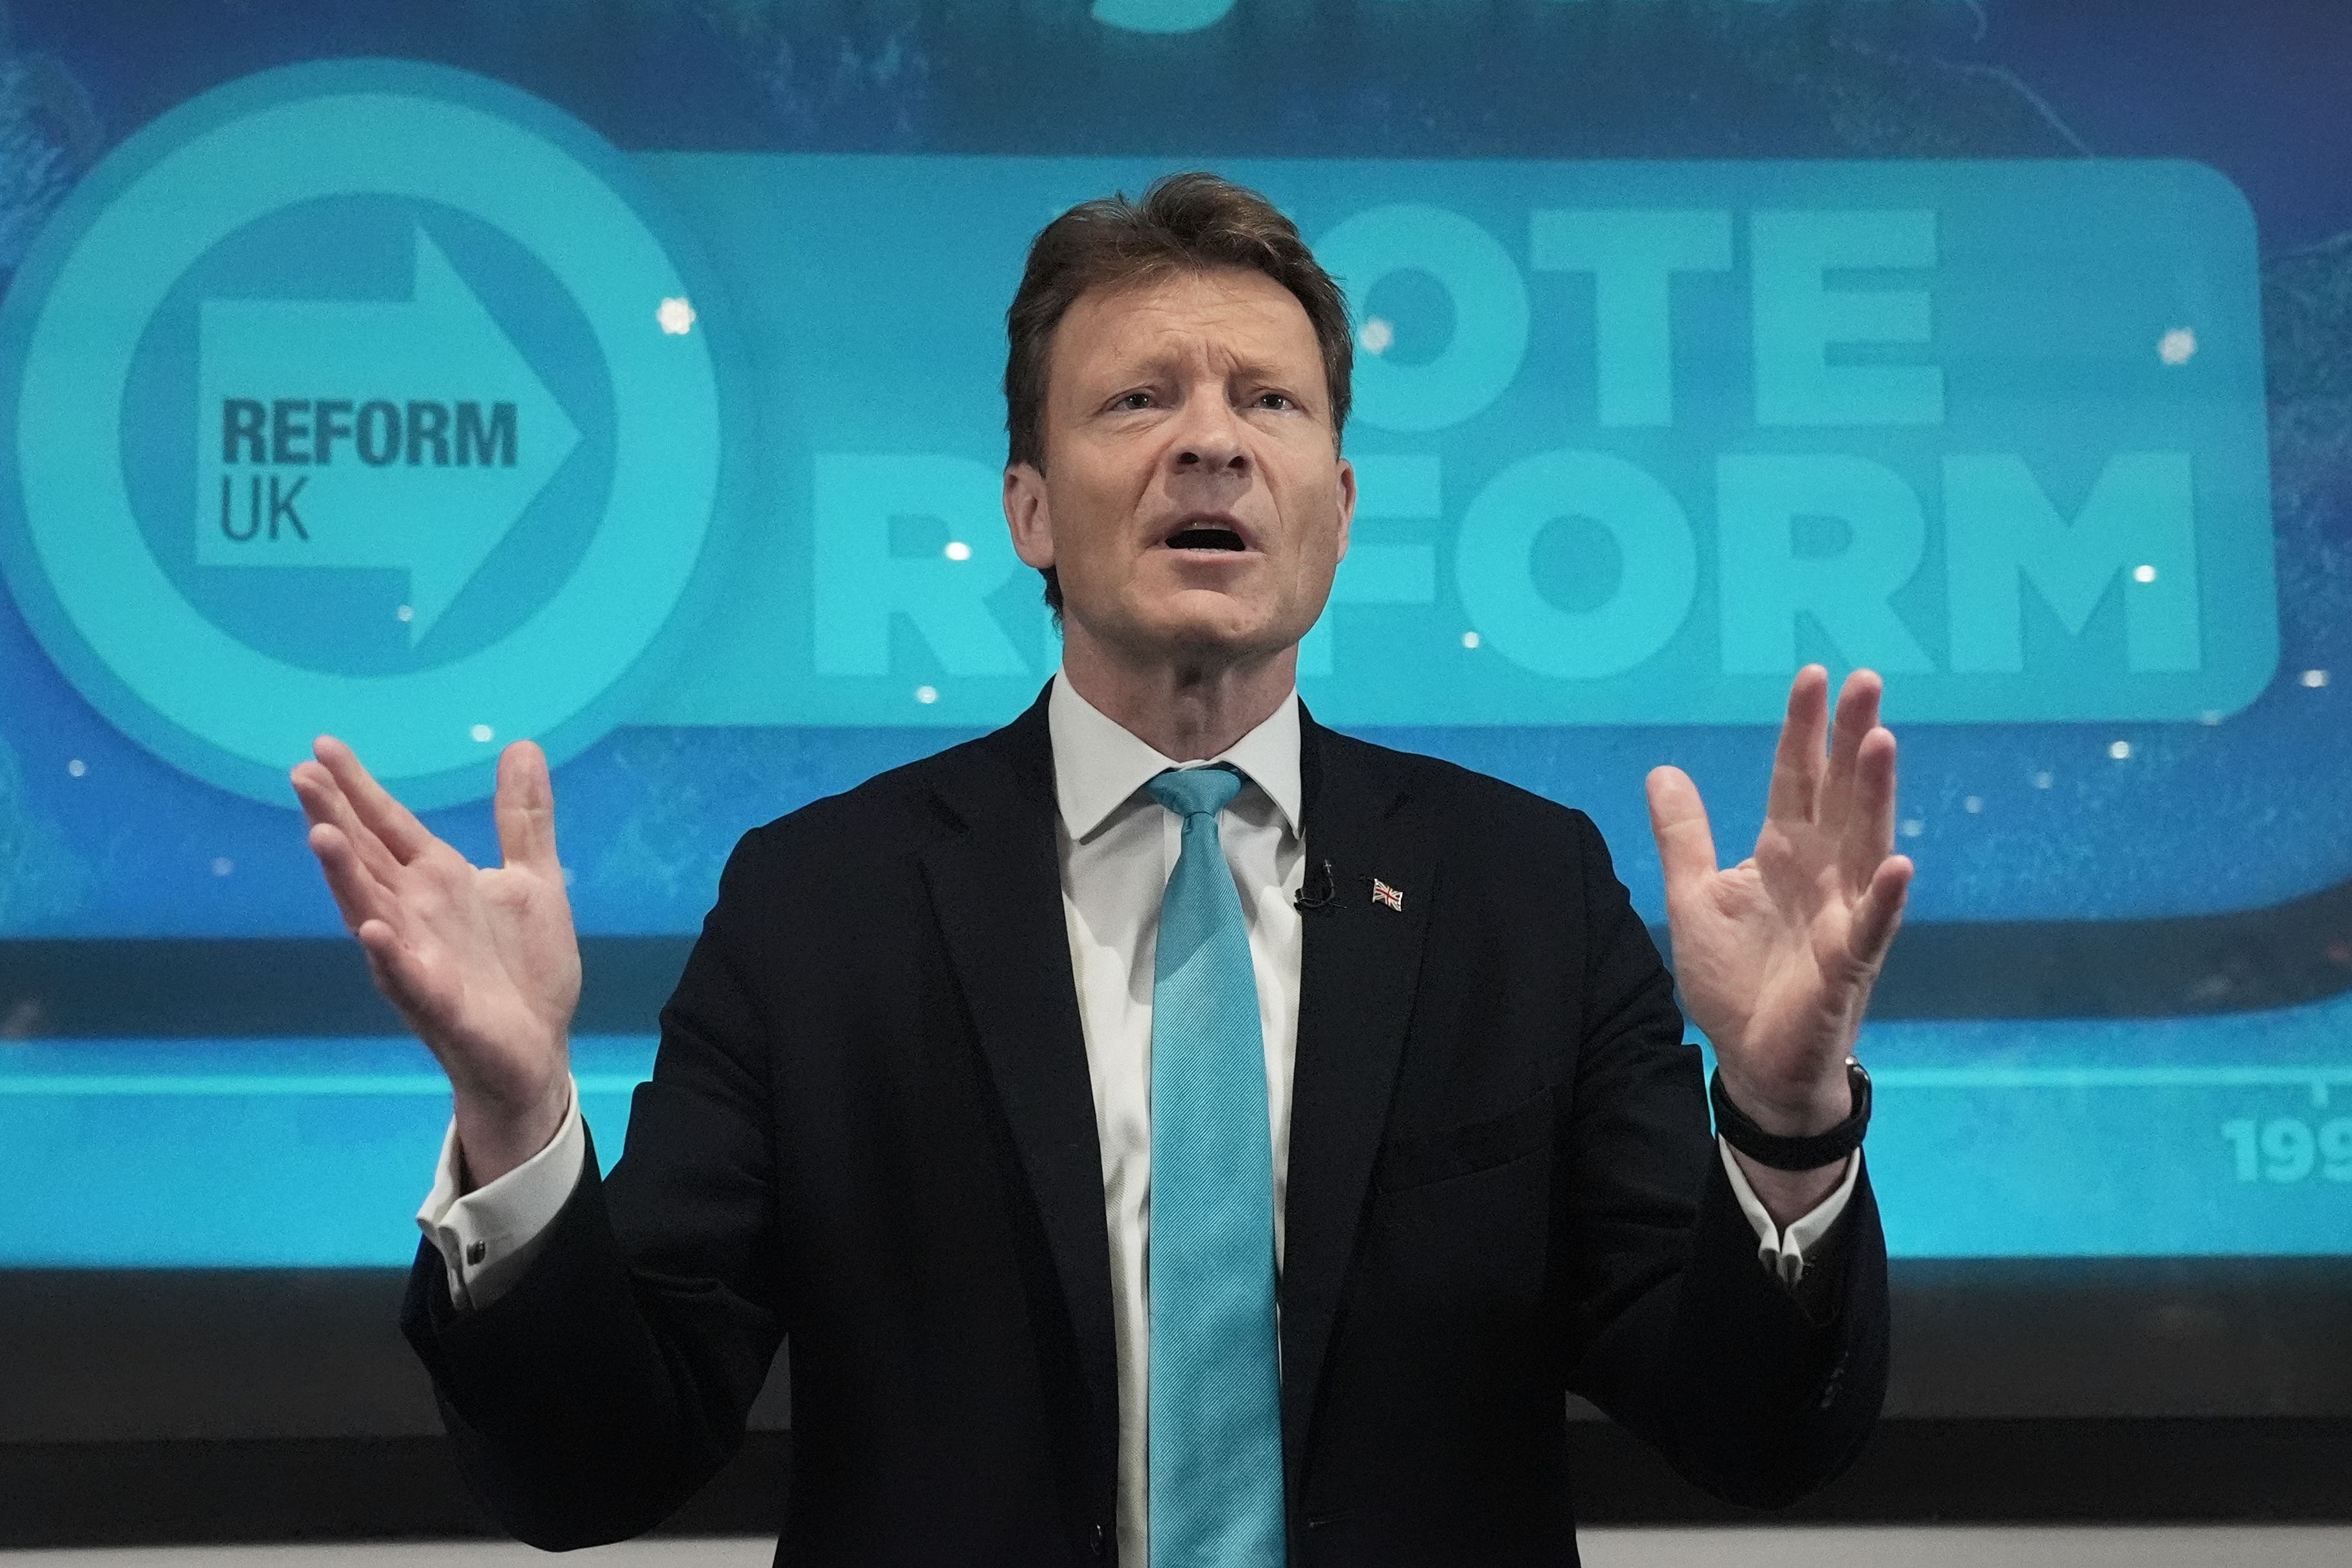 rishi sunak, keir starmer, reform uk, liberal democrats, richard tice, conservatives, downing street, general election 2024: how many seats could the liberal democrats and reform uk win?